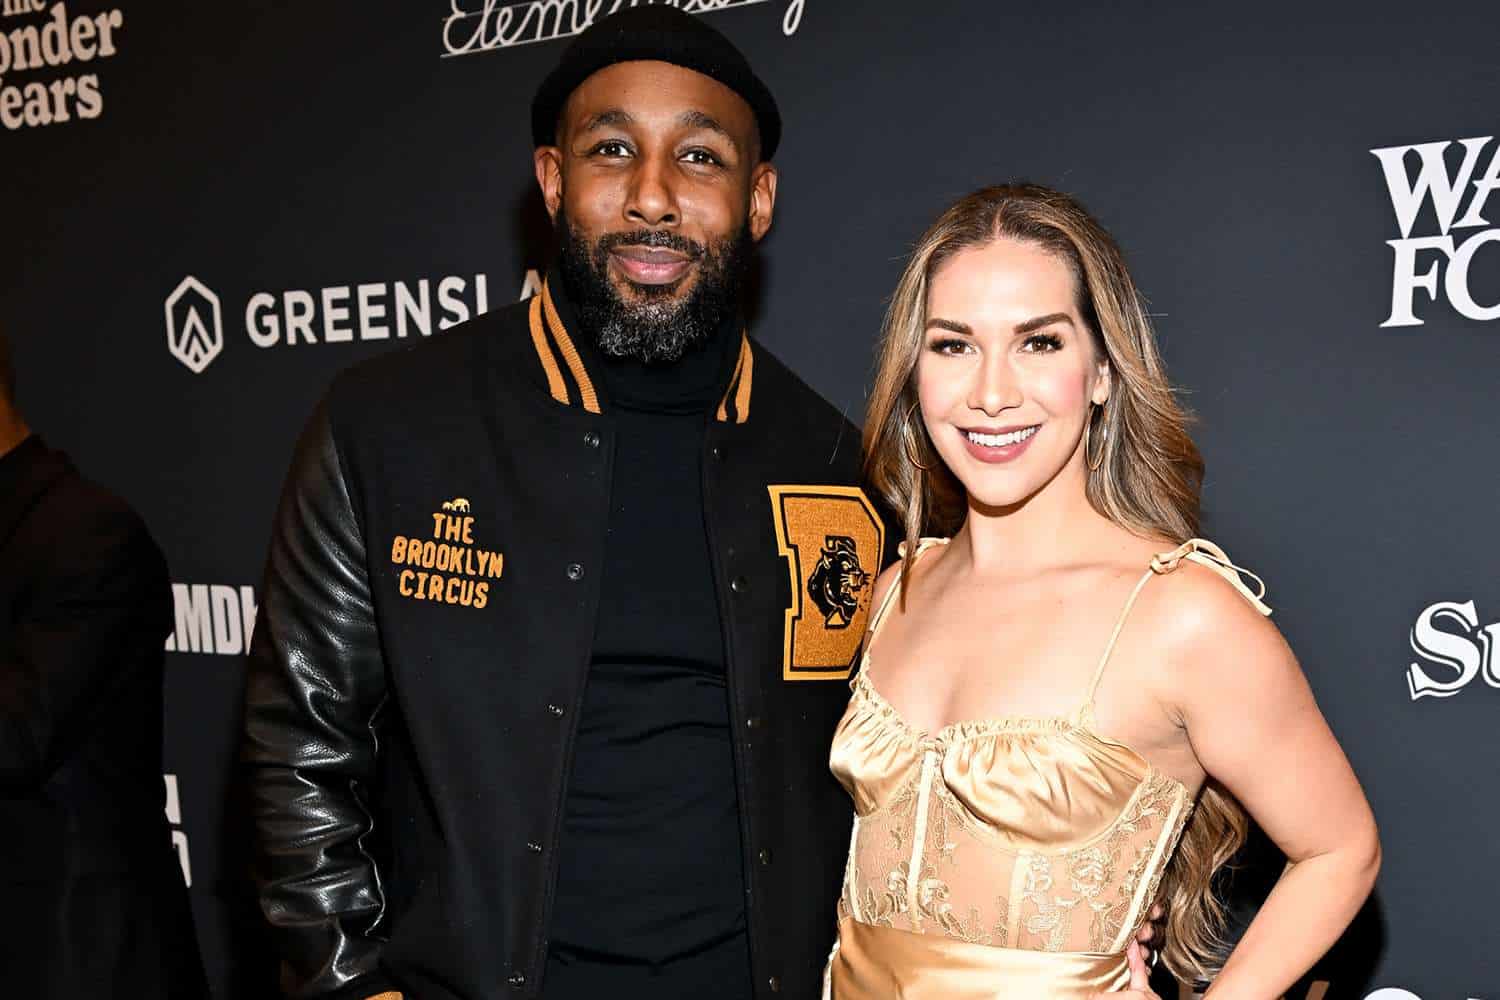 Stephen 'tWitch' Boss and wife, Allison Holker Boss